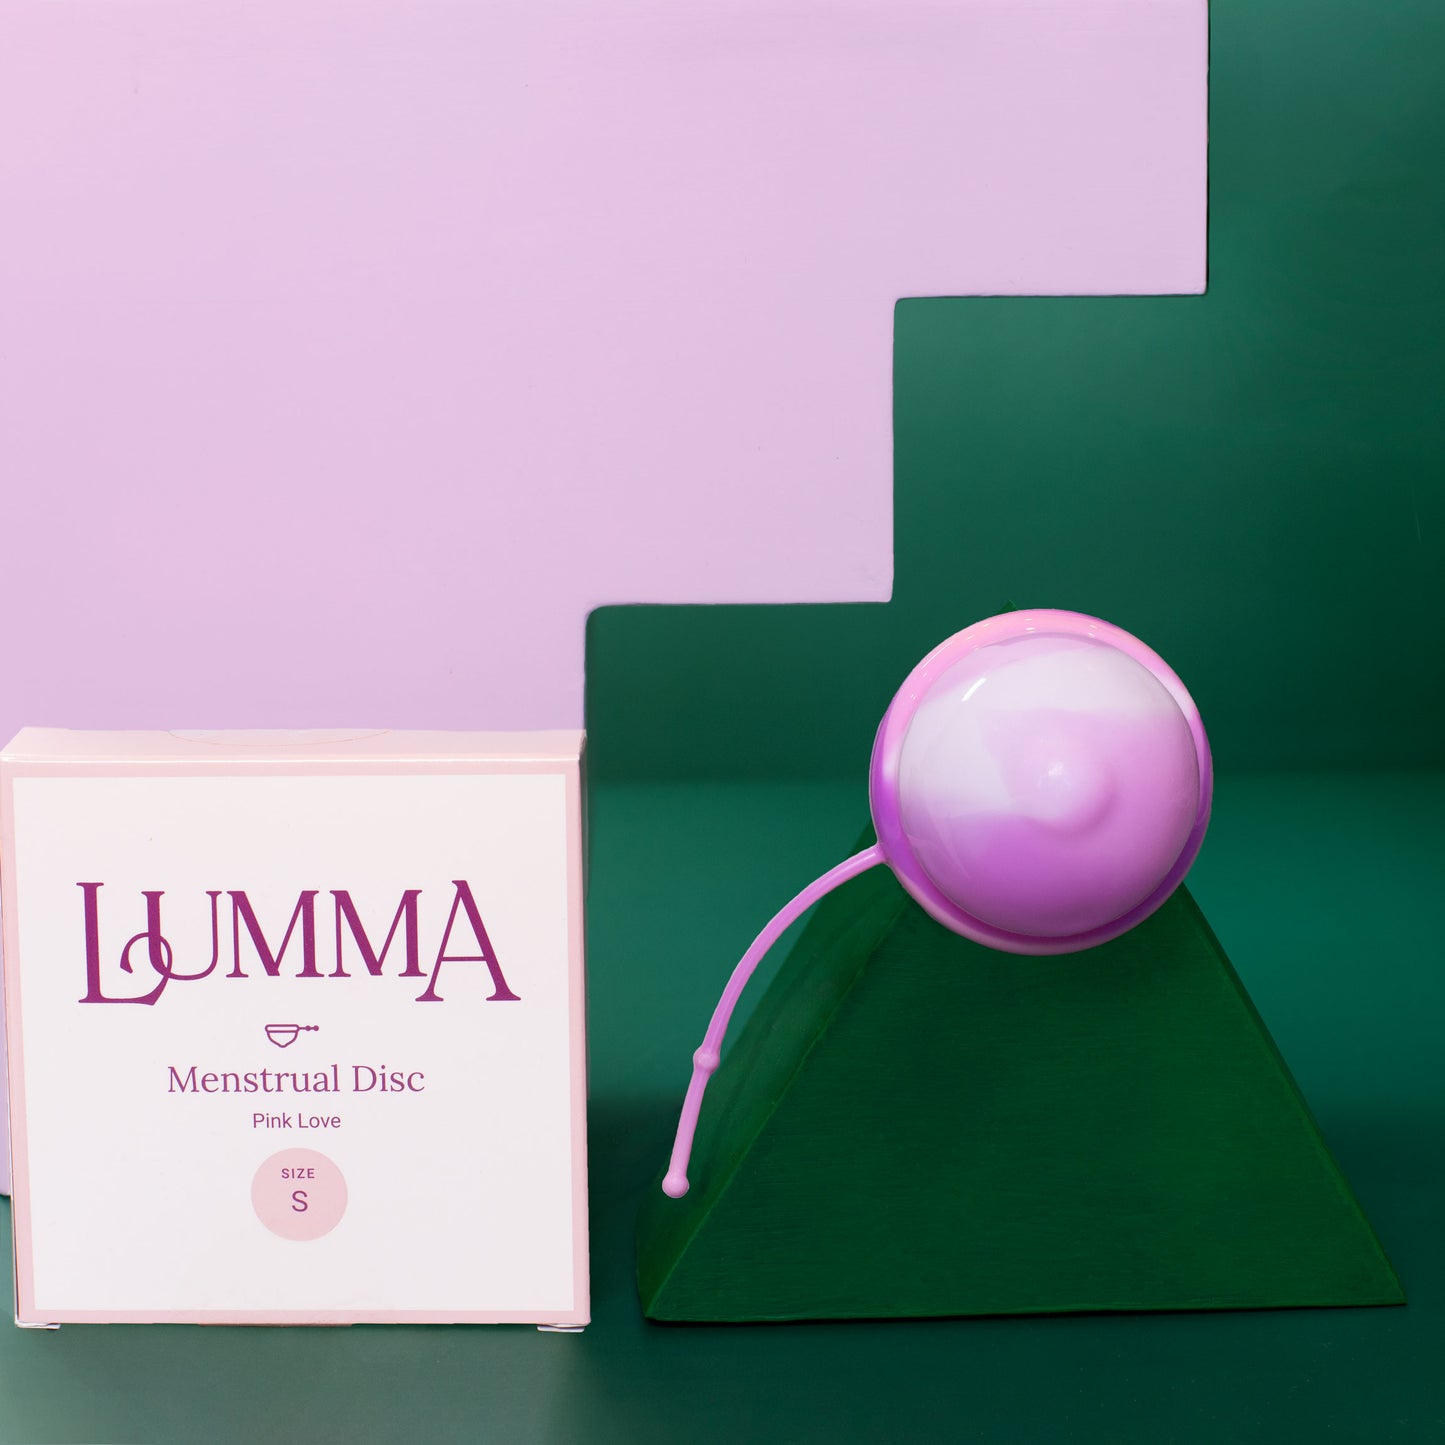 Lumma menstrual disc size Small Short in pink love with packaging